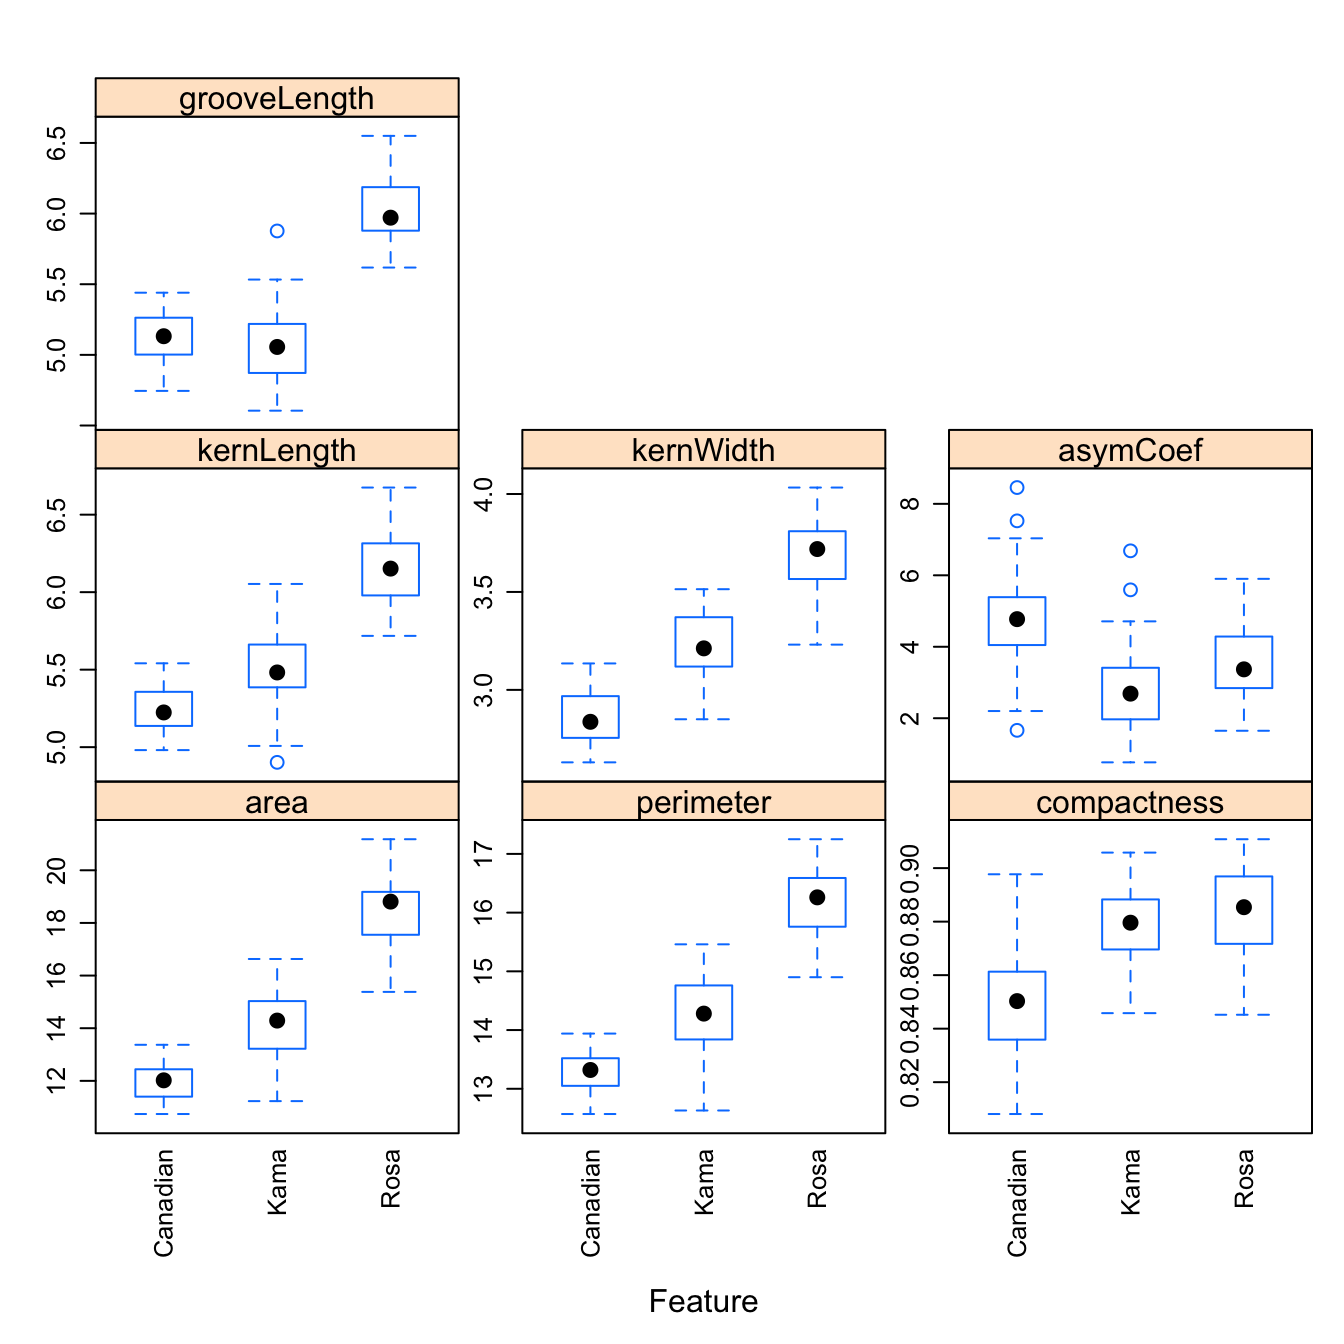 Boxplots of the 7 geometric parameters in the wheat data set